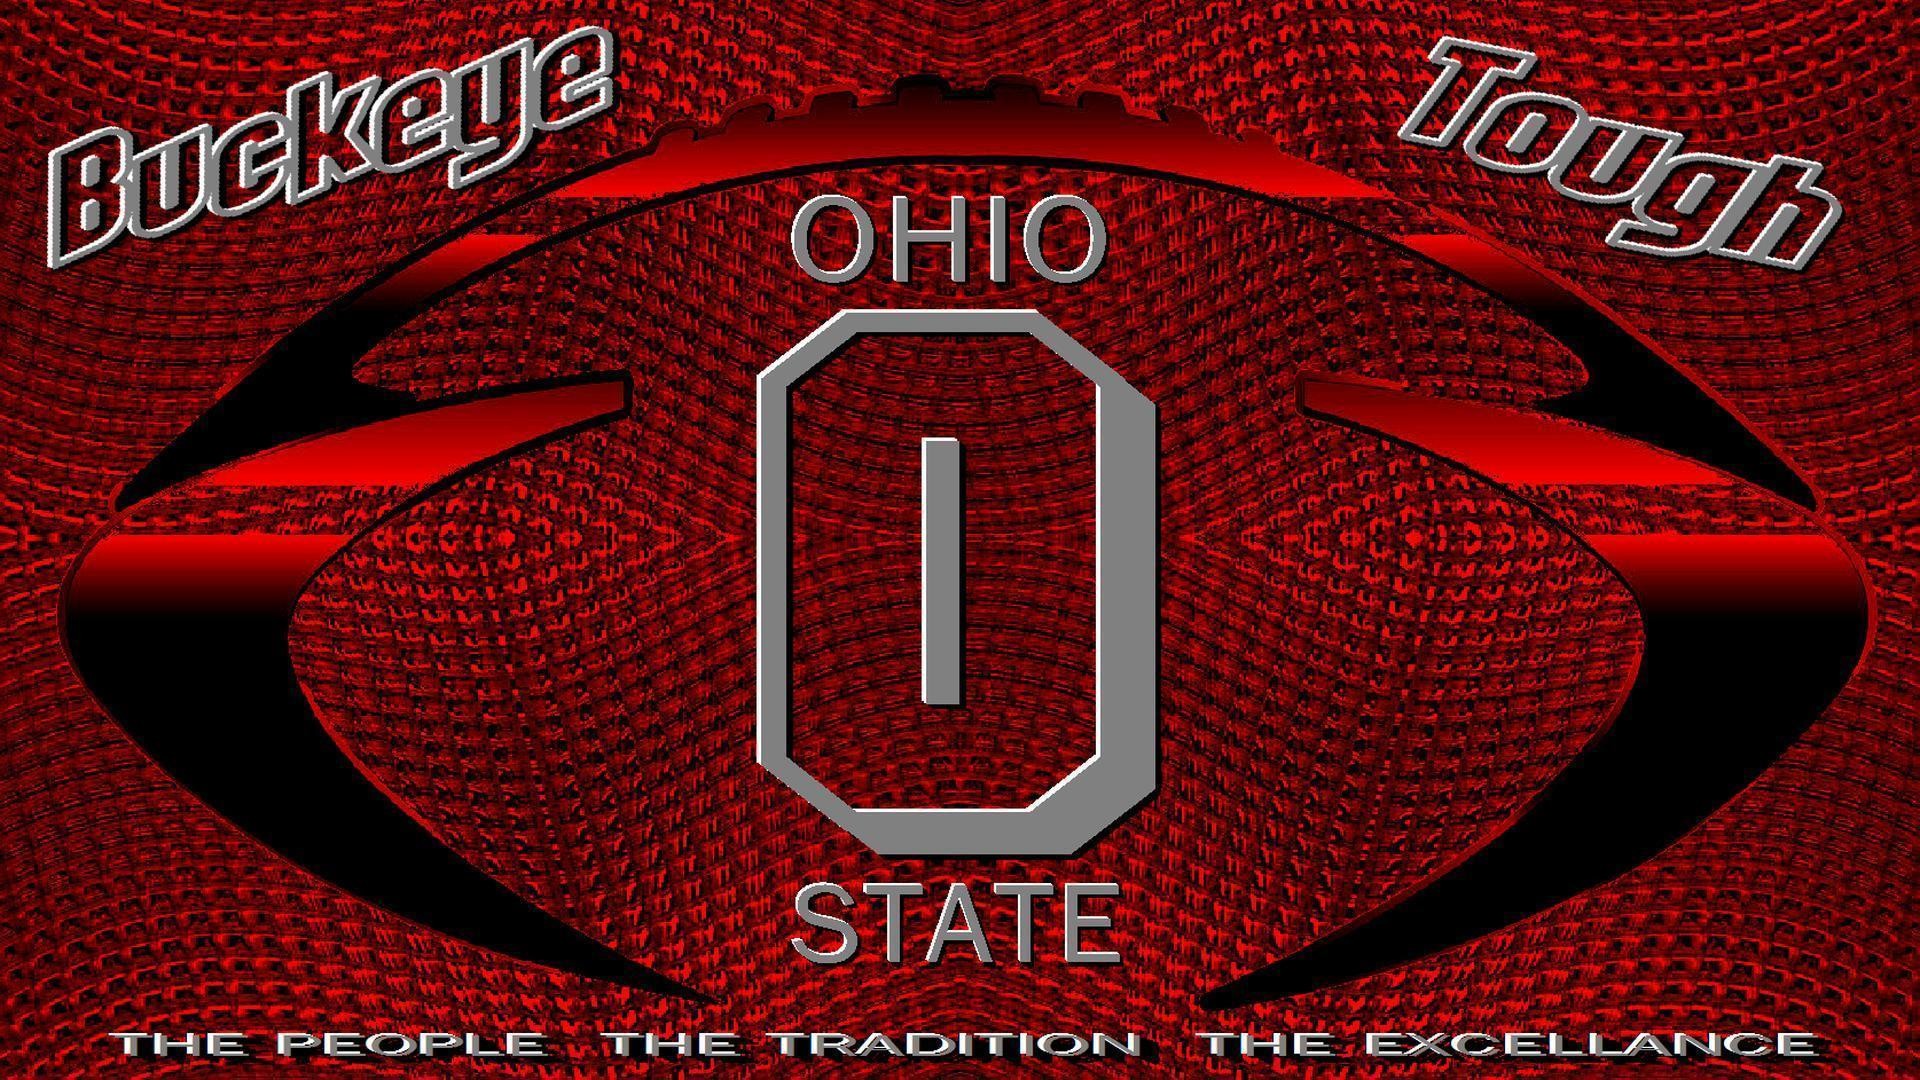 1920x1080 Ohio State Wallpaper 25096 Wallpapers HD | Hdpictureimages.